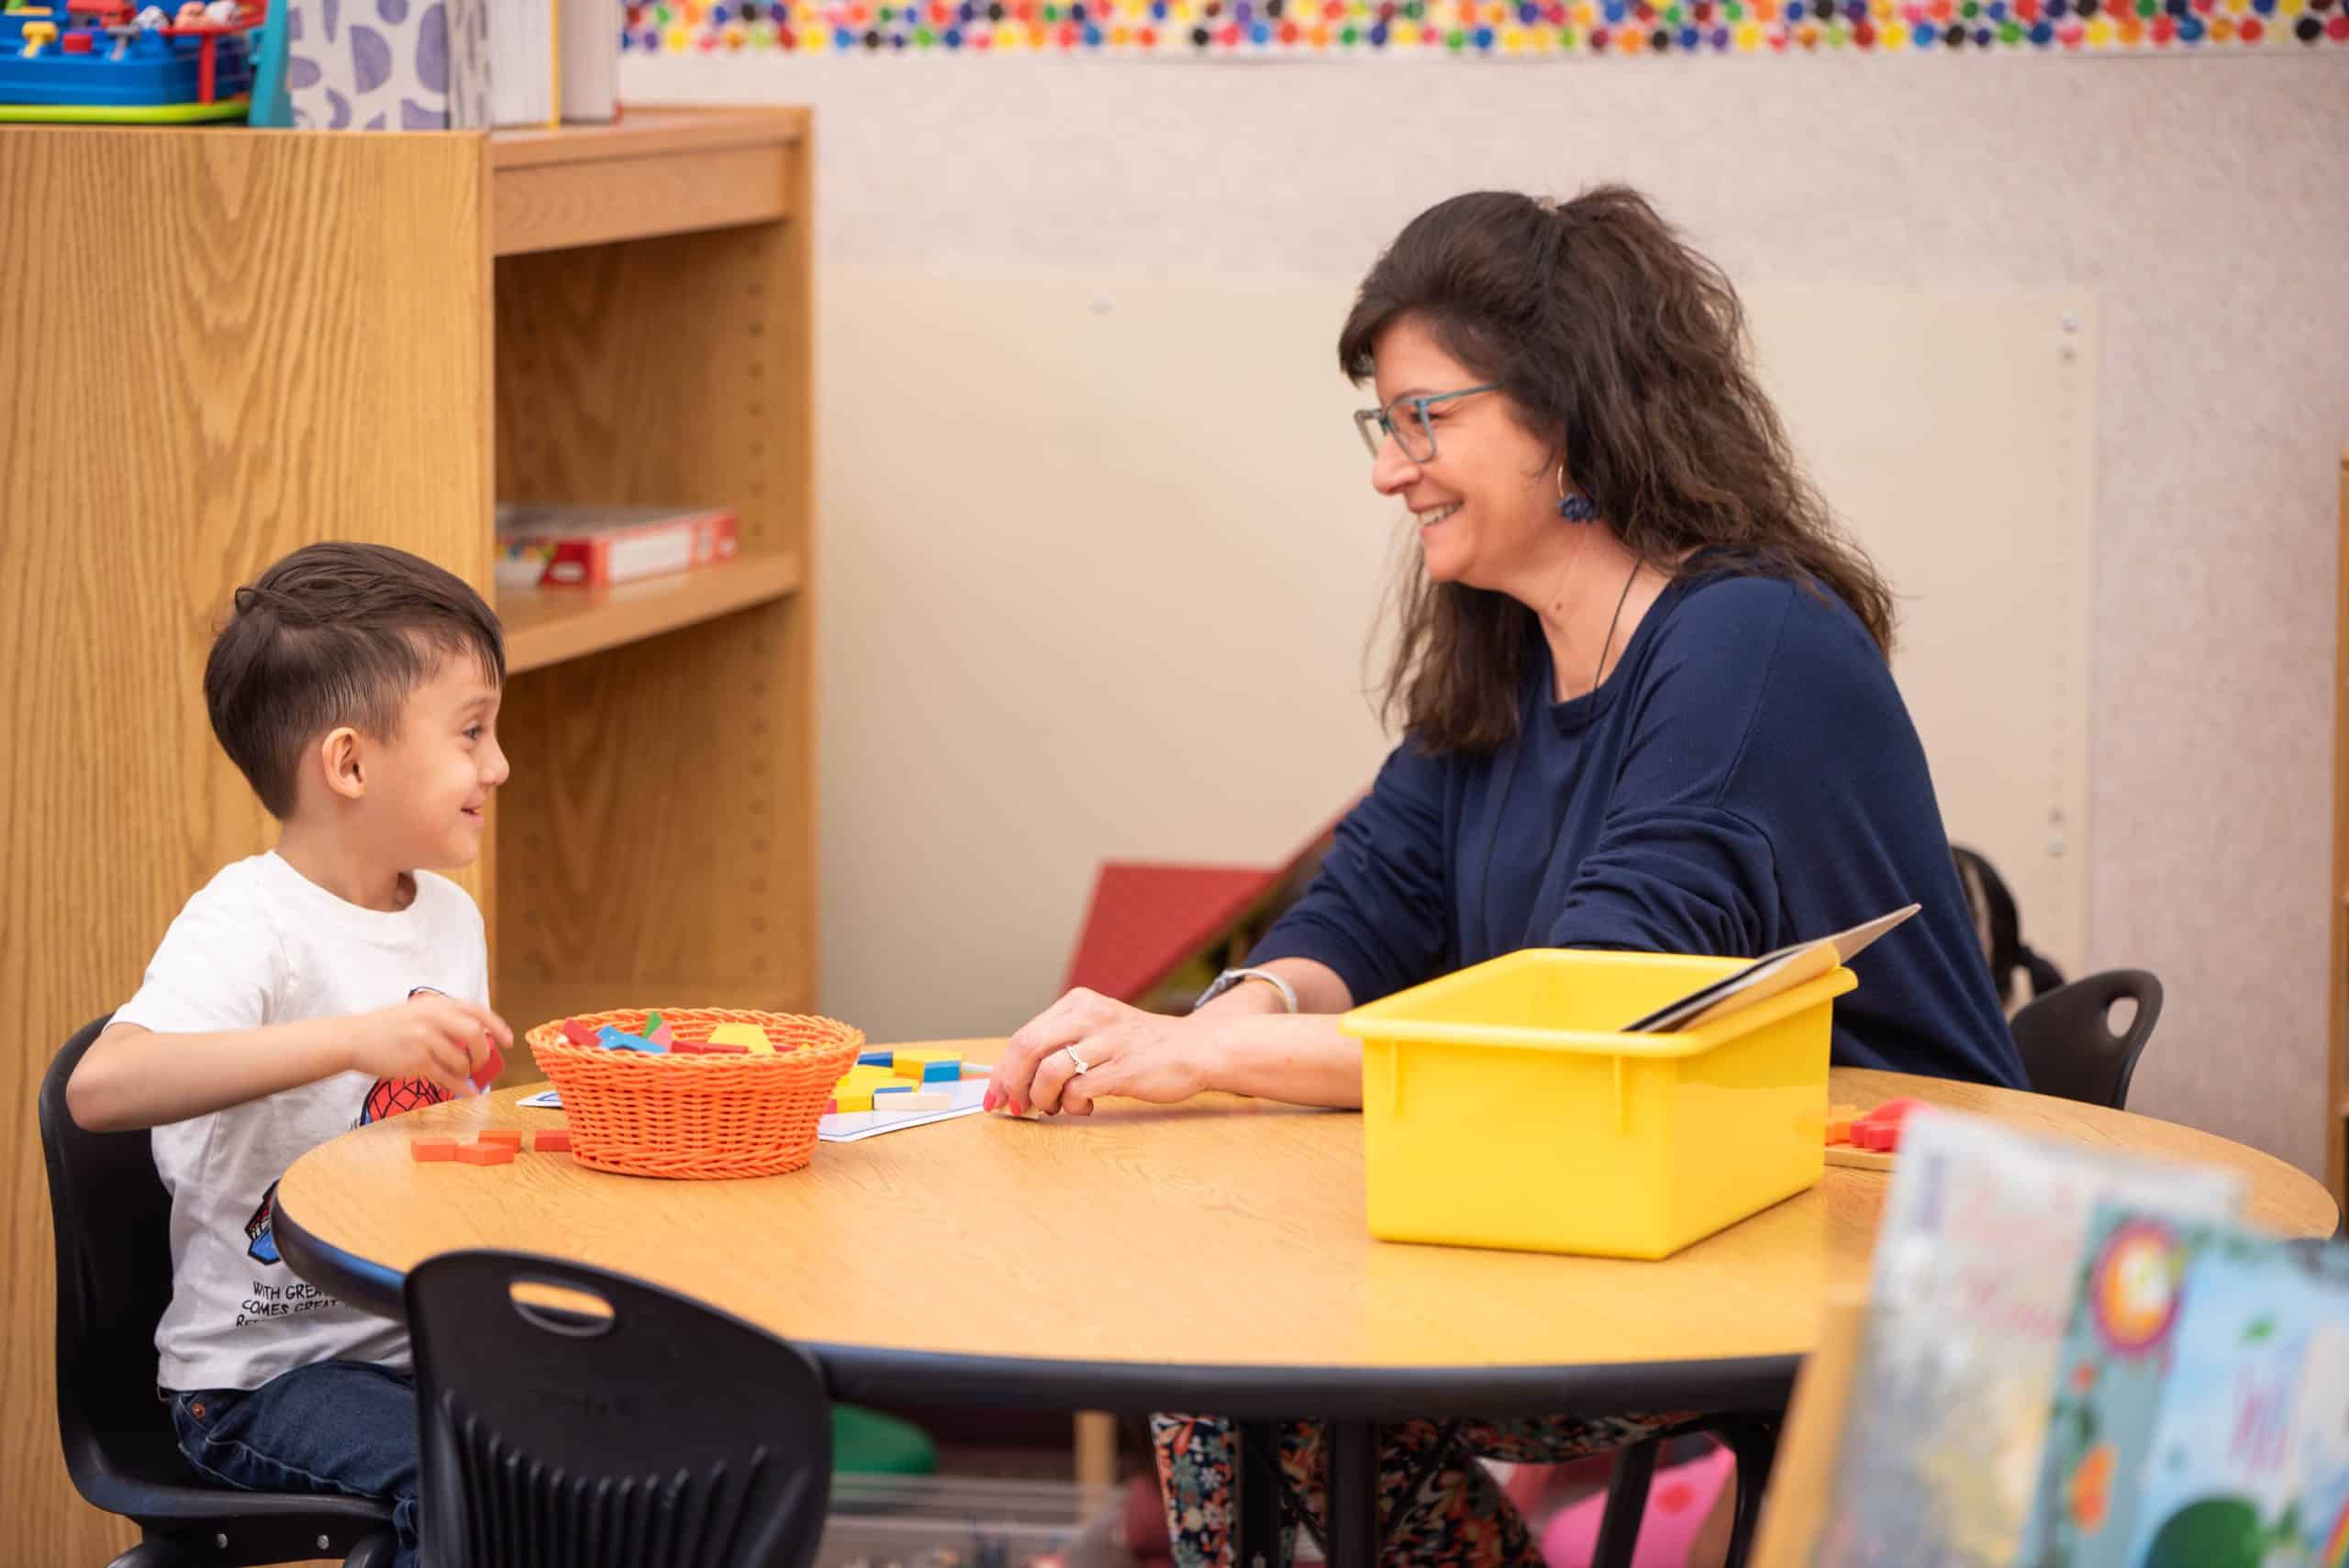 Alpine Elementary’s Preschool Teachers are Committed in Providing Academic Excellence